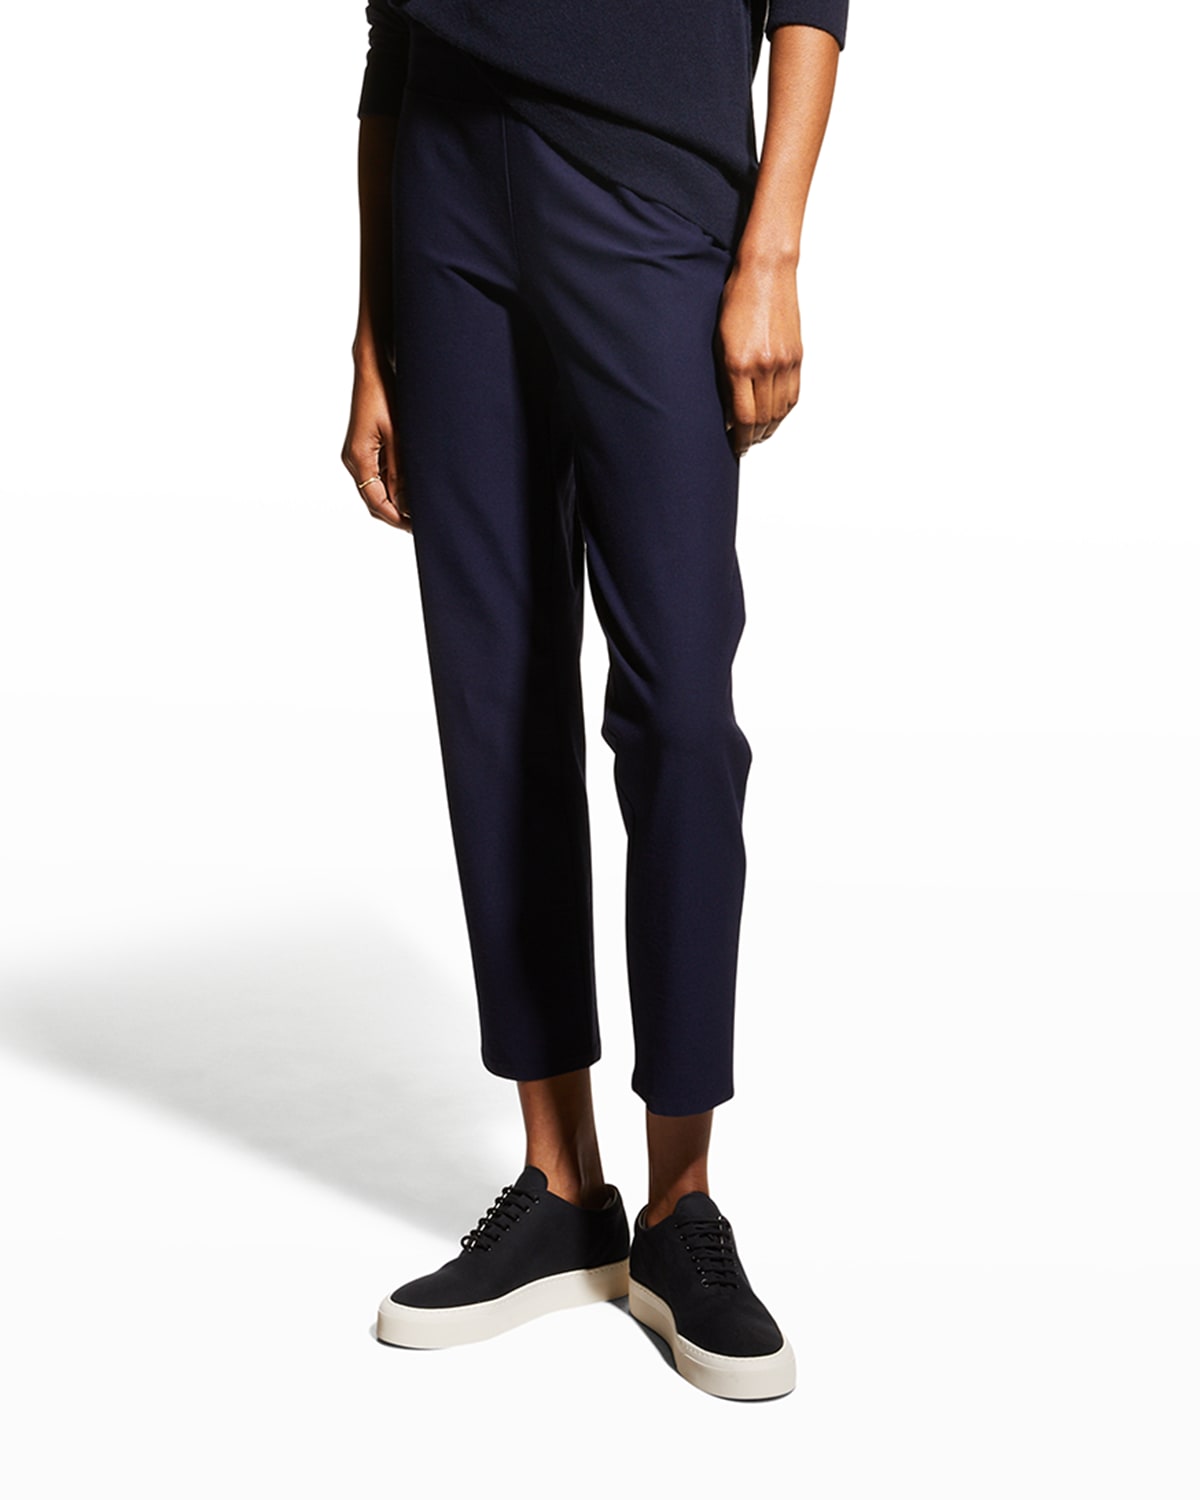 Eileen Fisher Washable Stretch Crepe Slim Ankle Pant